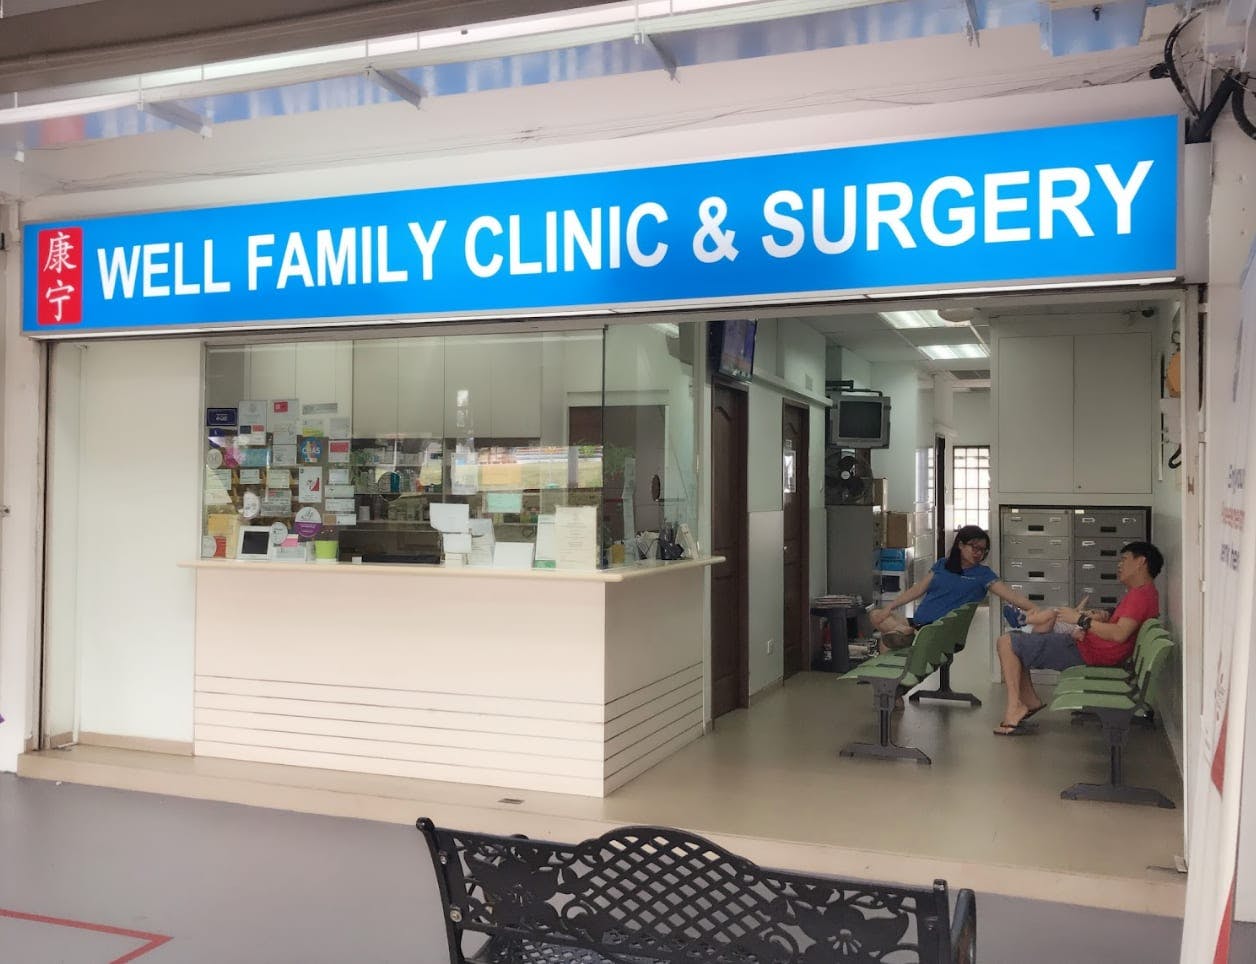 Well Family Clinic & Surgery